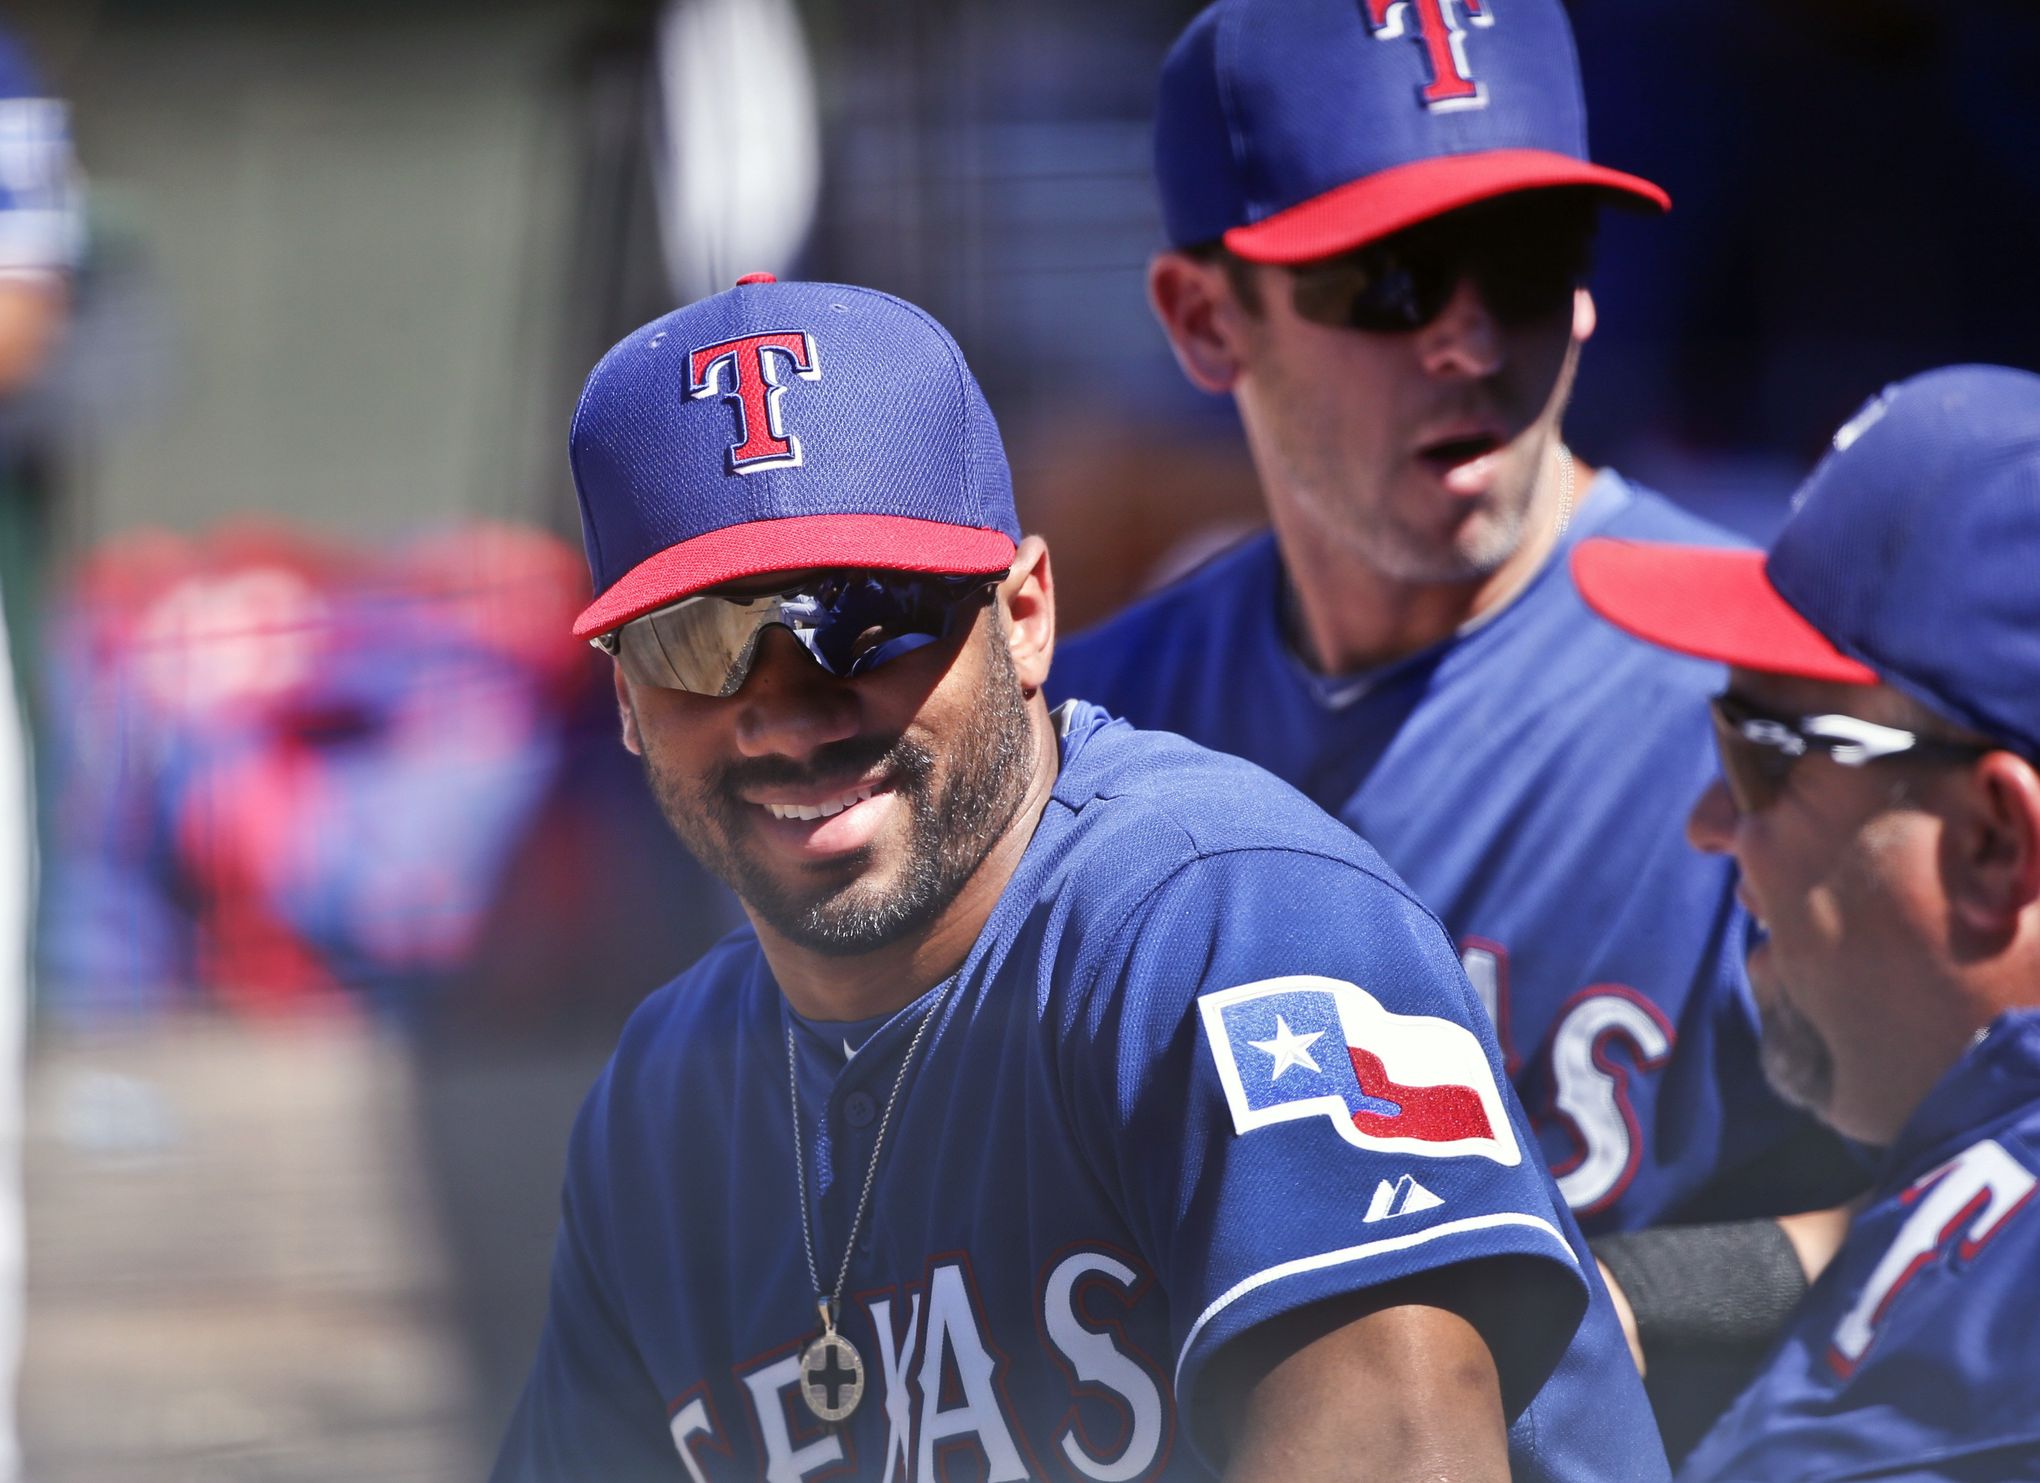 Russell Wilson merchandise on sale at Rangers camp and team stores